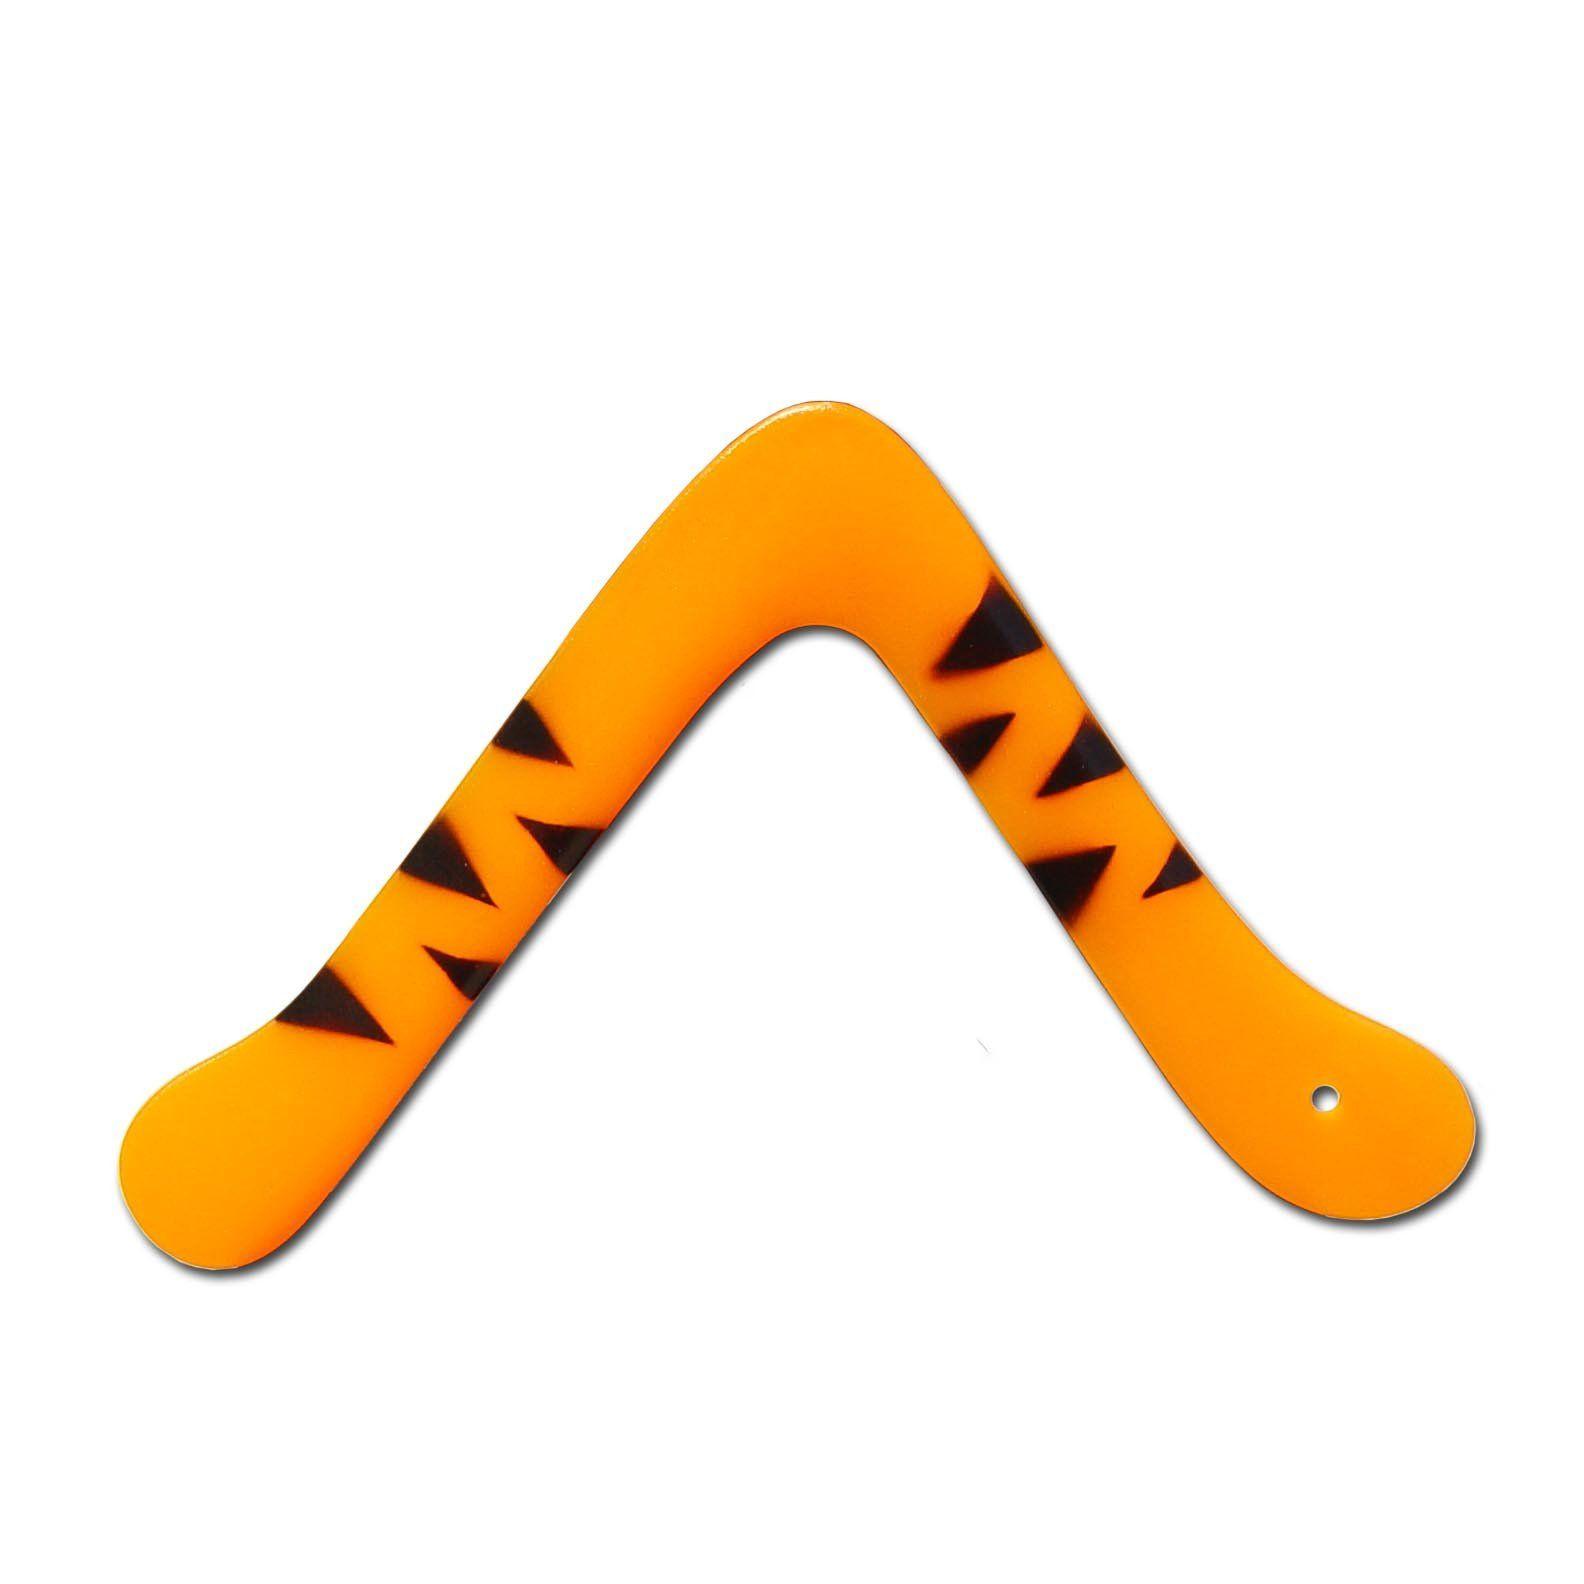 With Two Boomerangs Logo - Boomerangs.com - Buy a Boomerang and Learn How to Throw a Boomerang